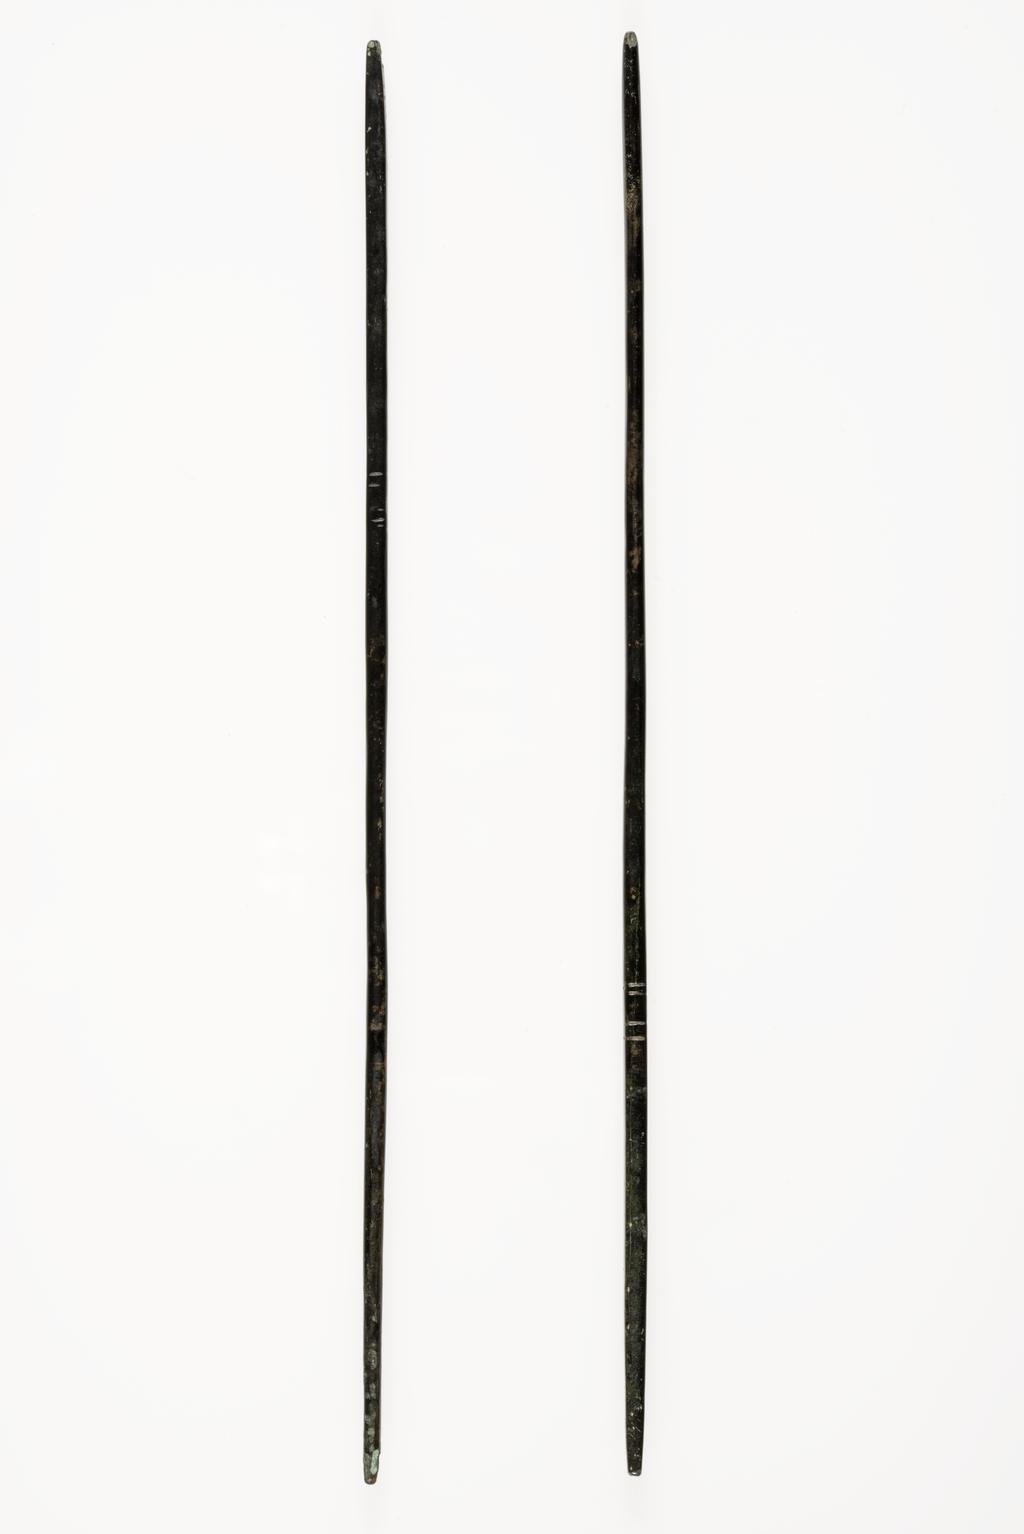 An image of A pair of black bronze chop sticks, with a square cross section at the top. The lower part is round, with two pairs of notches as the owner's mark. Beautifully balanced. Korean?